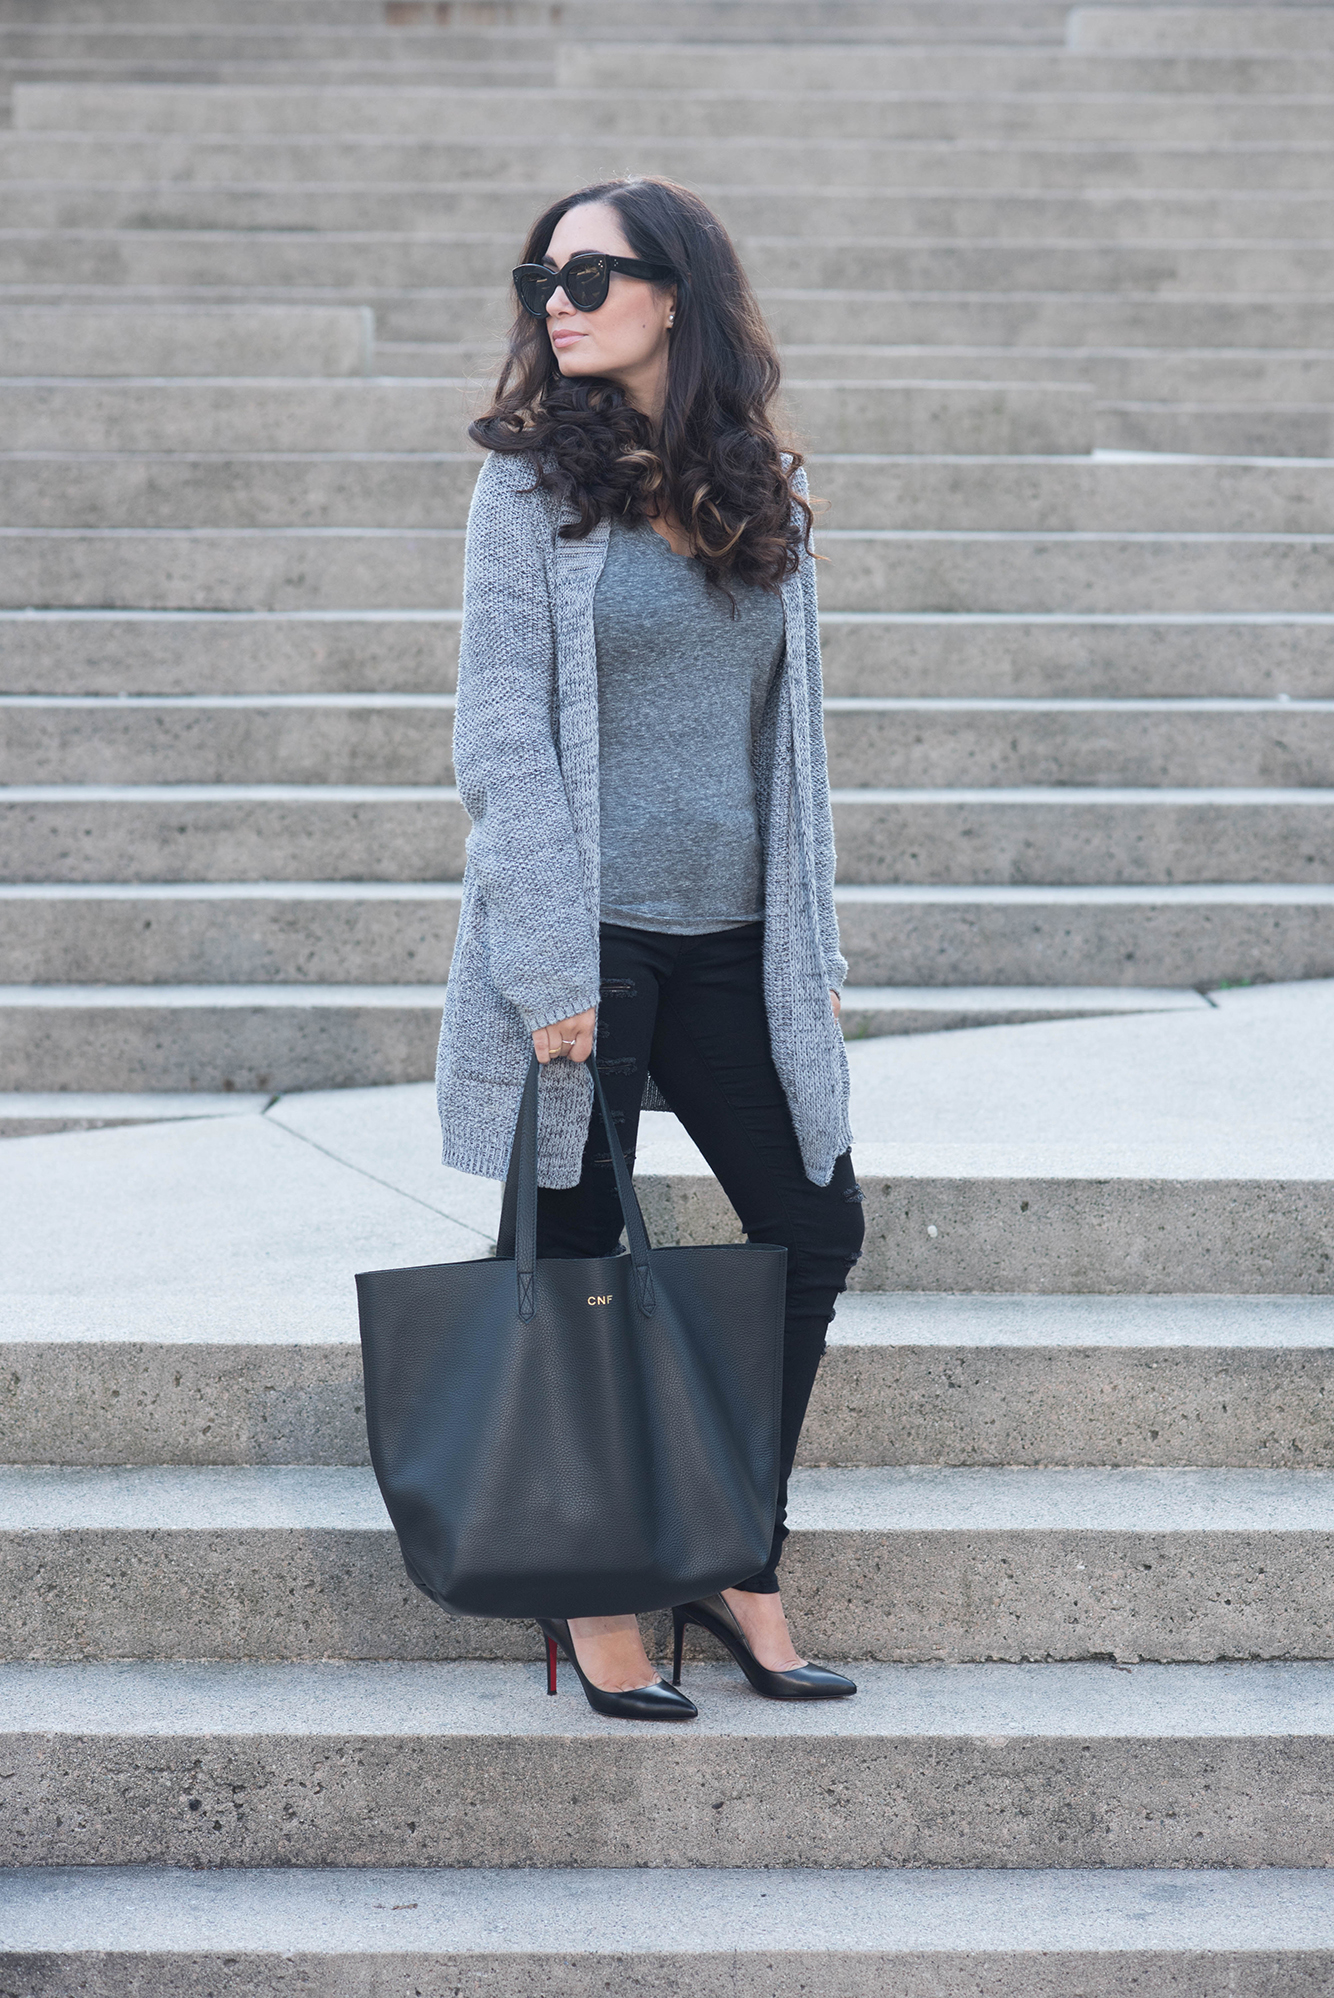 coco-and-vera-top-vancouver-style-blog-top-canadian-style-blog-top-blogger-street-style-sezane-cardigan-bdg-tee-celine-sunglasses-mavi-jeans-christian-louboutin-heels-cuyana-tote